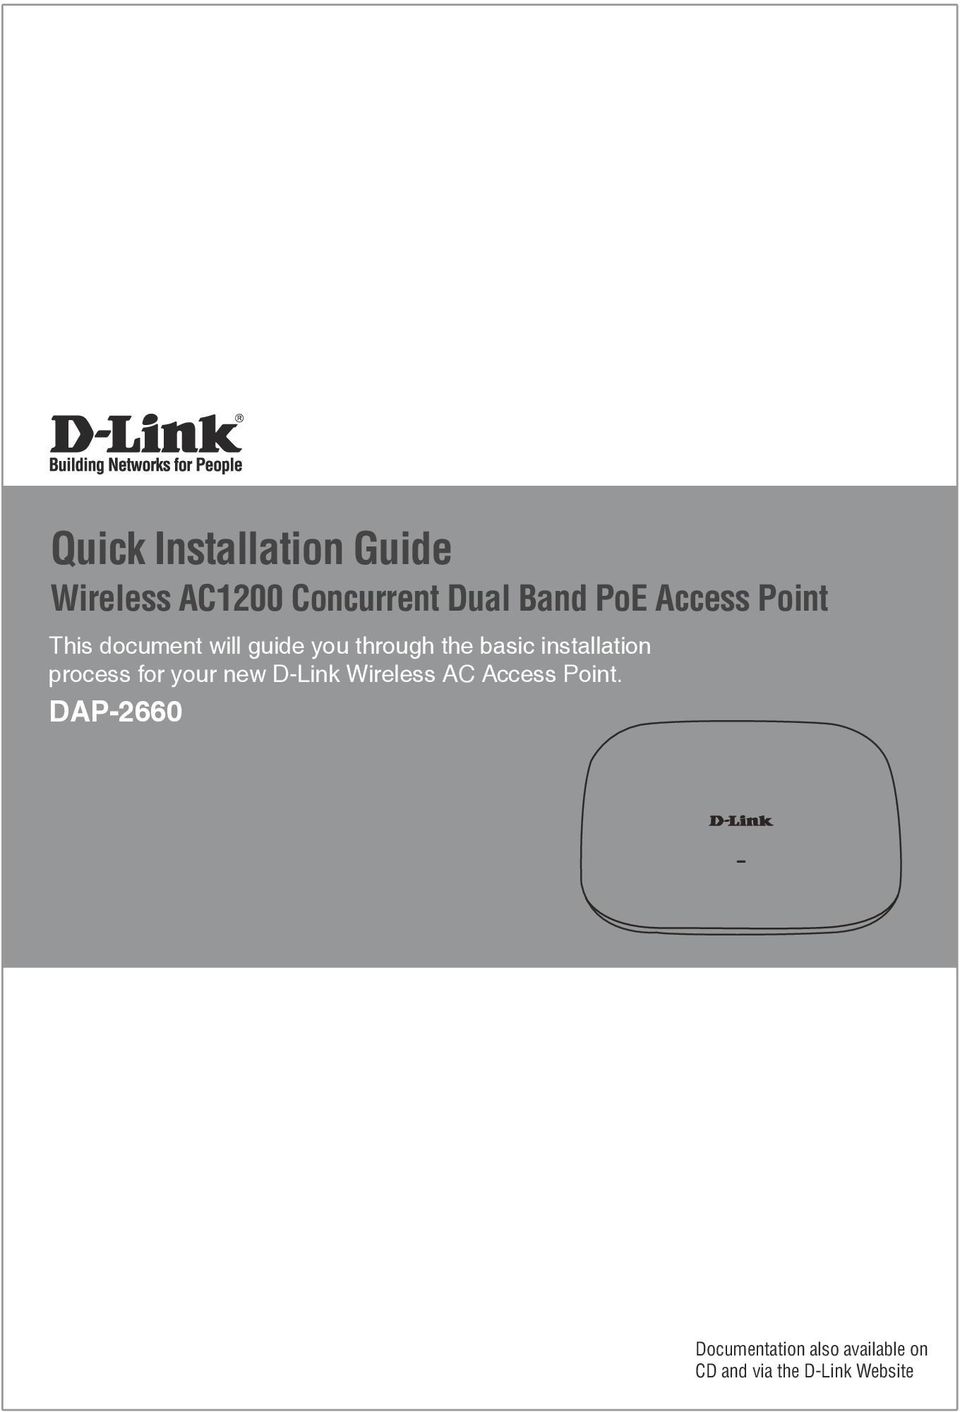 installation process for your new D-Link Wireless AC Access Point.